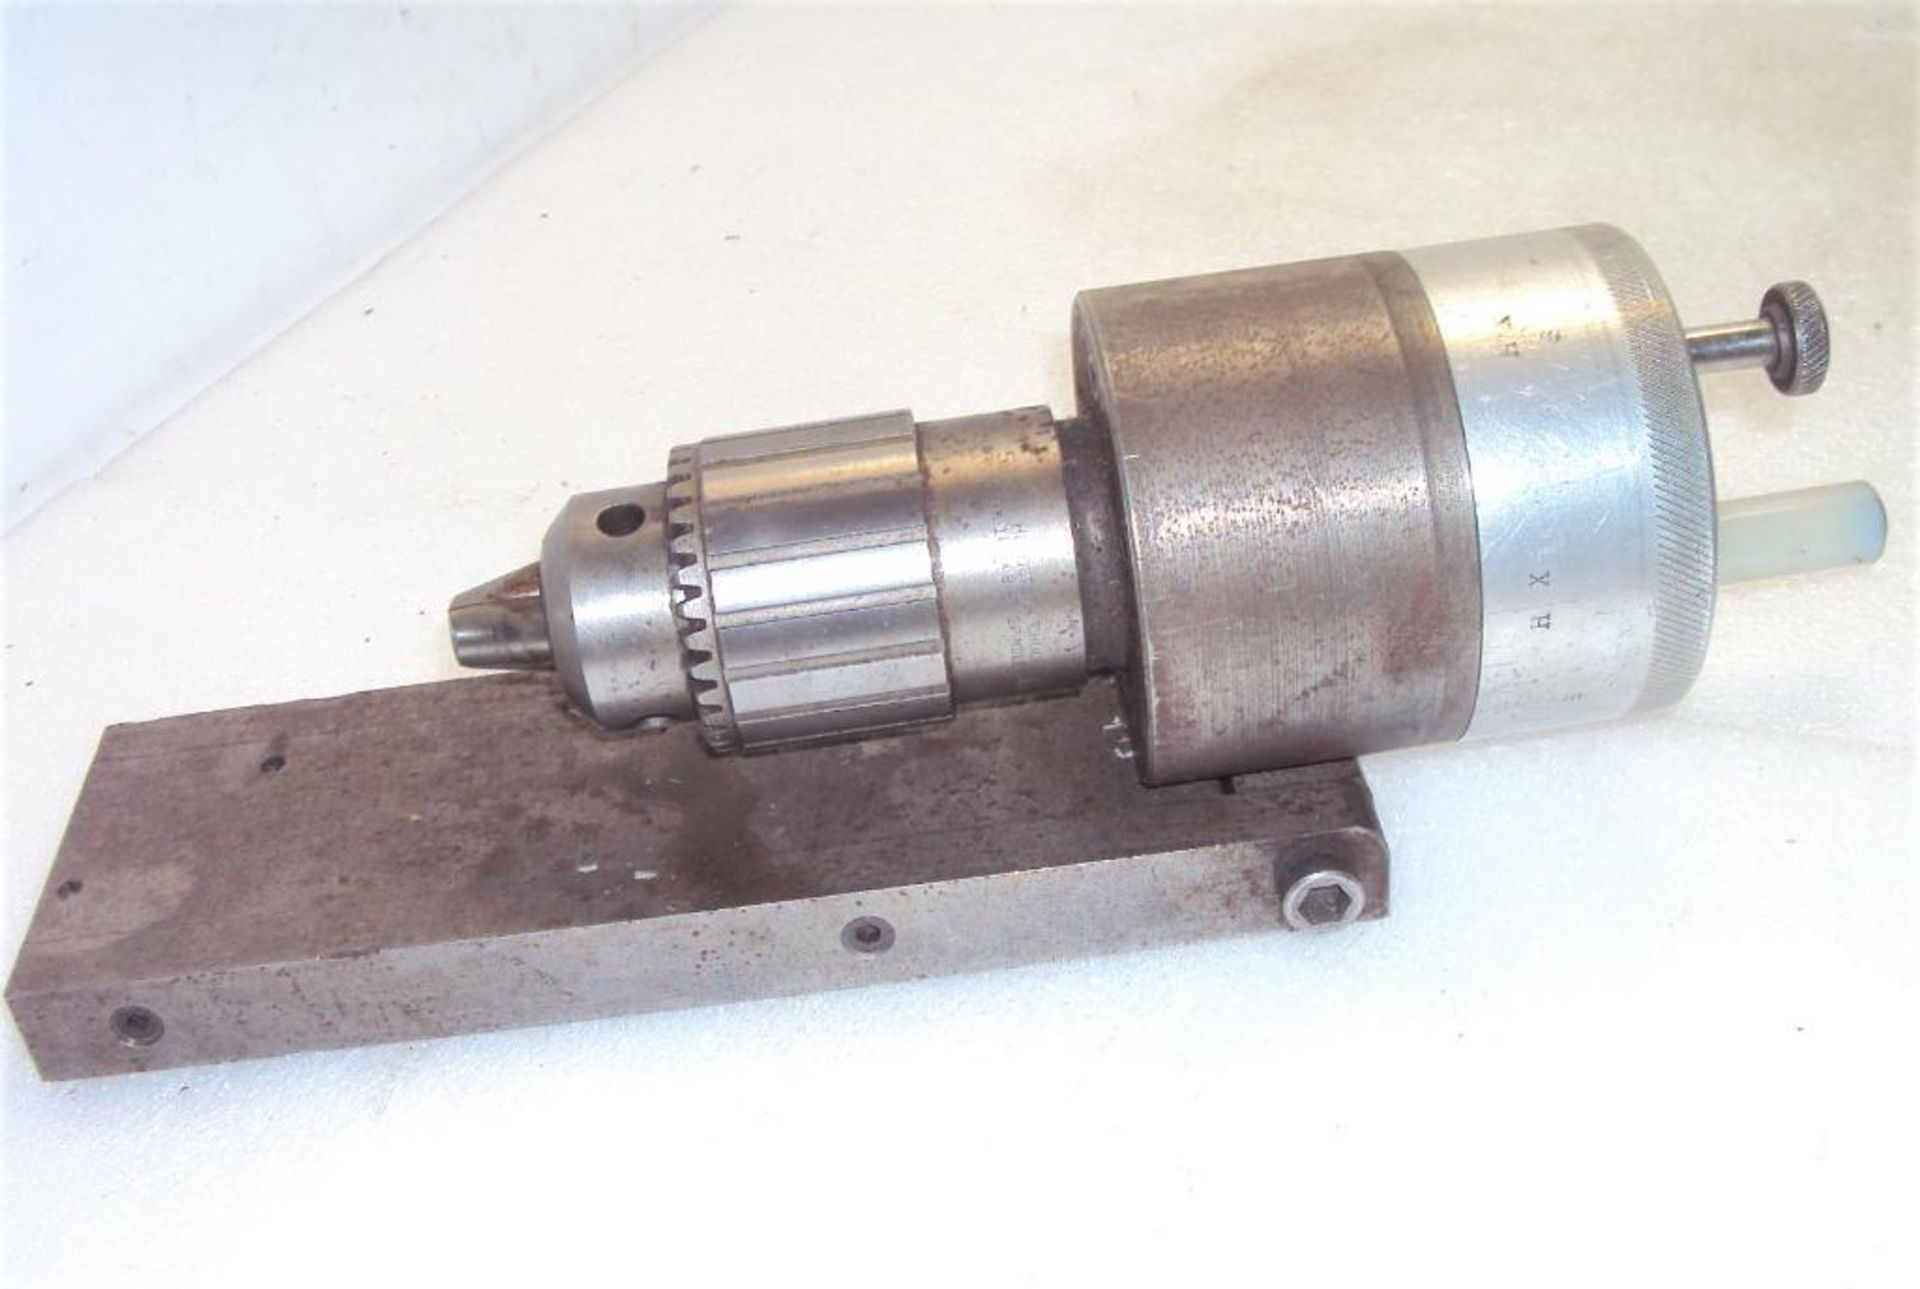 Jacobs 58B Headstock Spindle Chuck